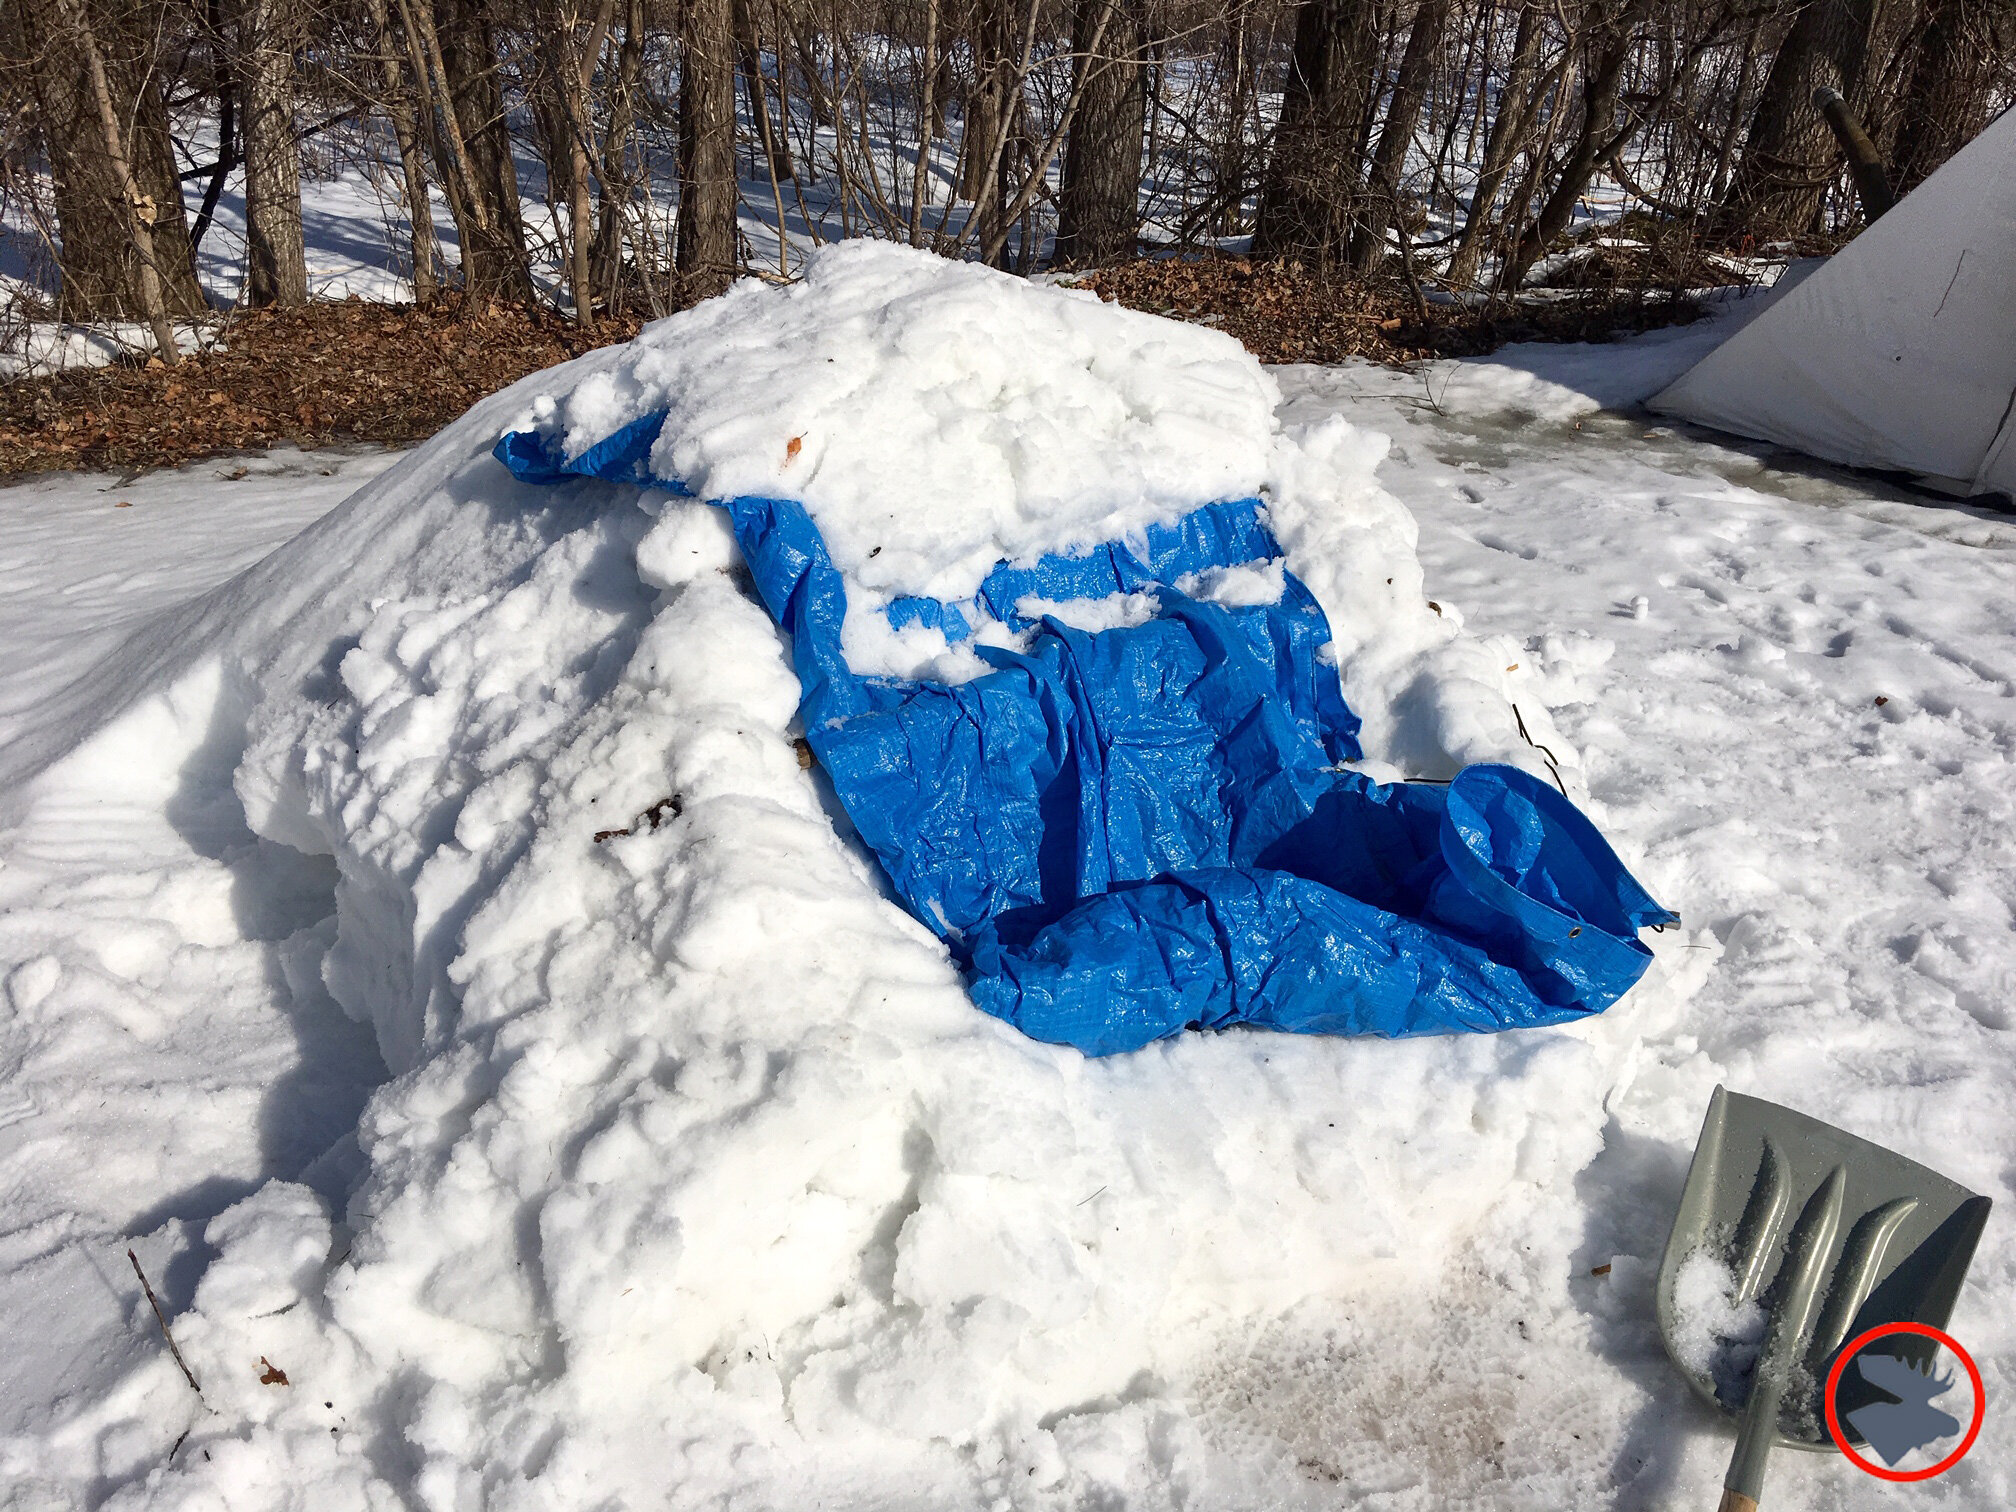 Snow Shelters: Why We Don't Build Igloos In The Forest